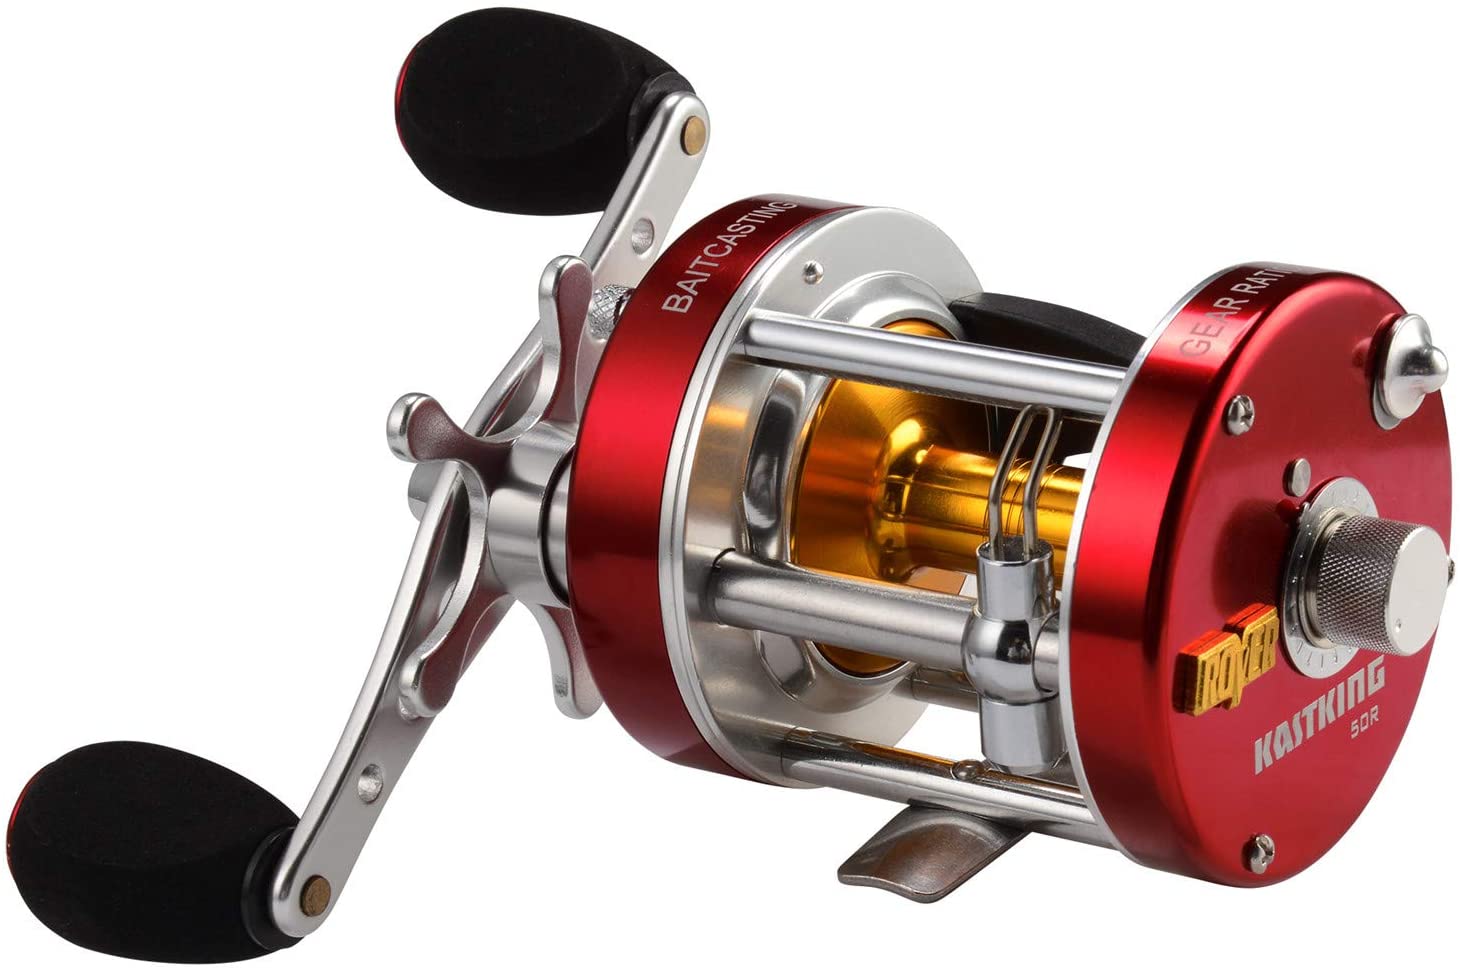 The Saltwater Casting Reels 2